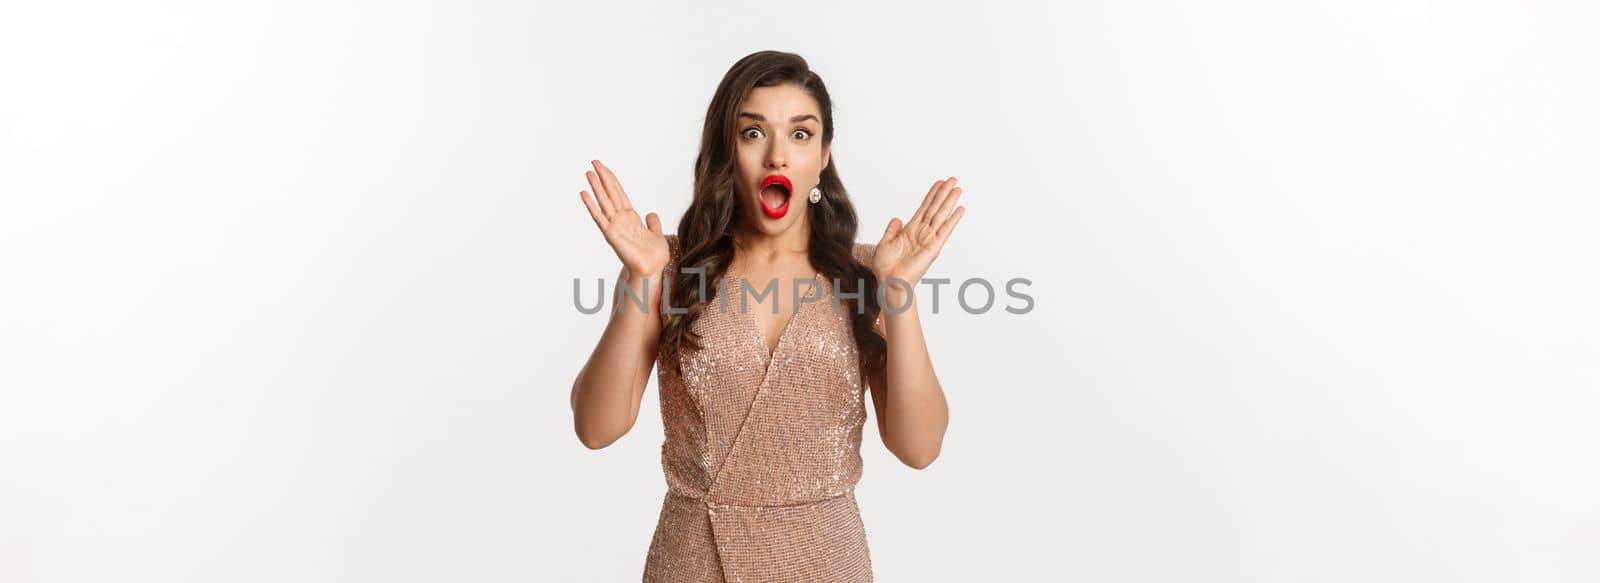 Winter holidays. Beautiful woman in evening dress and makeup, looking surprised and impressed at camera, stare at New Year promo offer, white background.